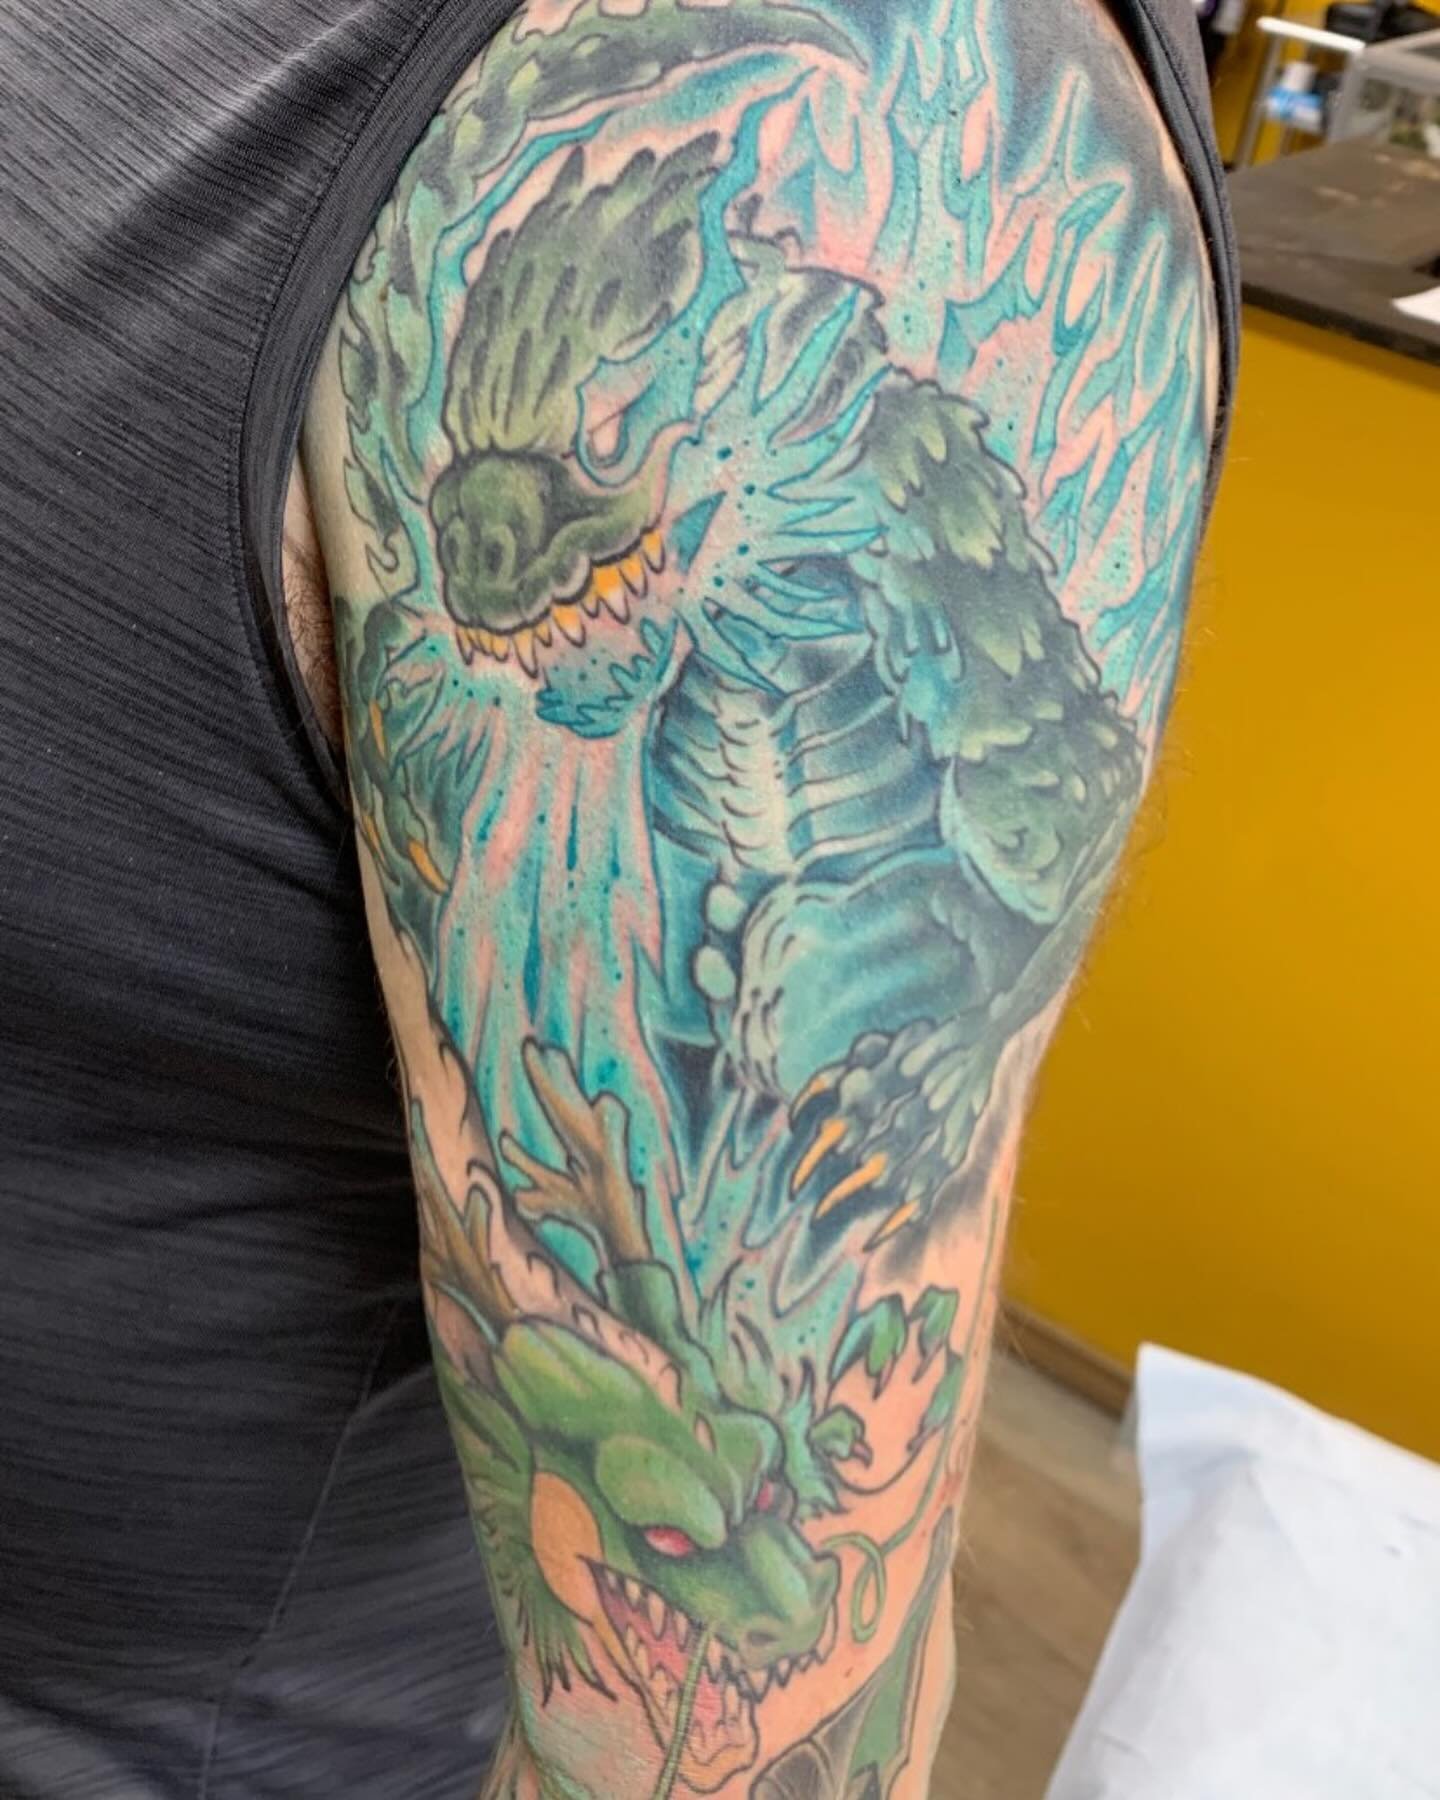 Little progress shot of this awesome sleeve Zach is working on .